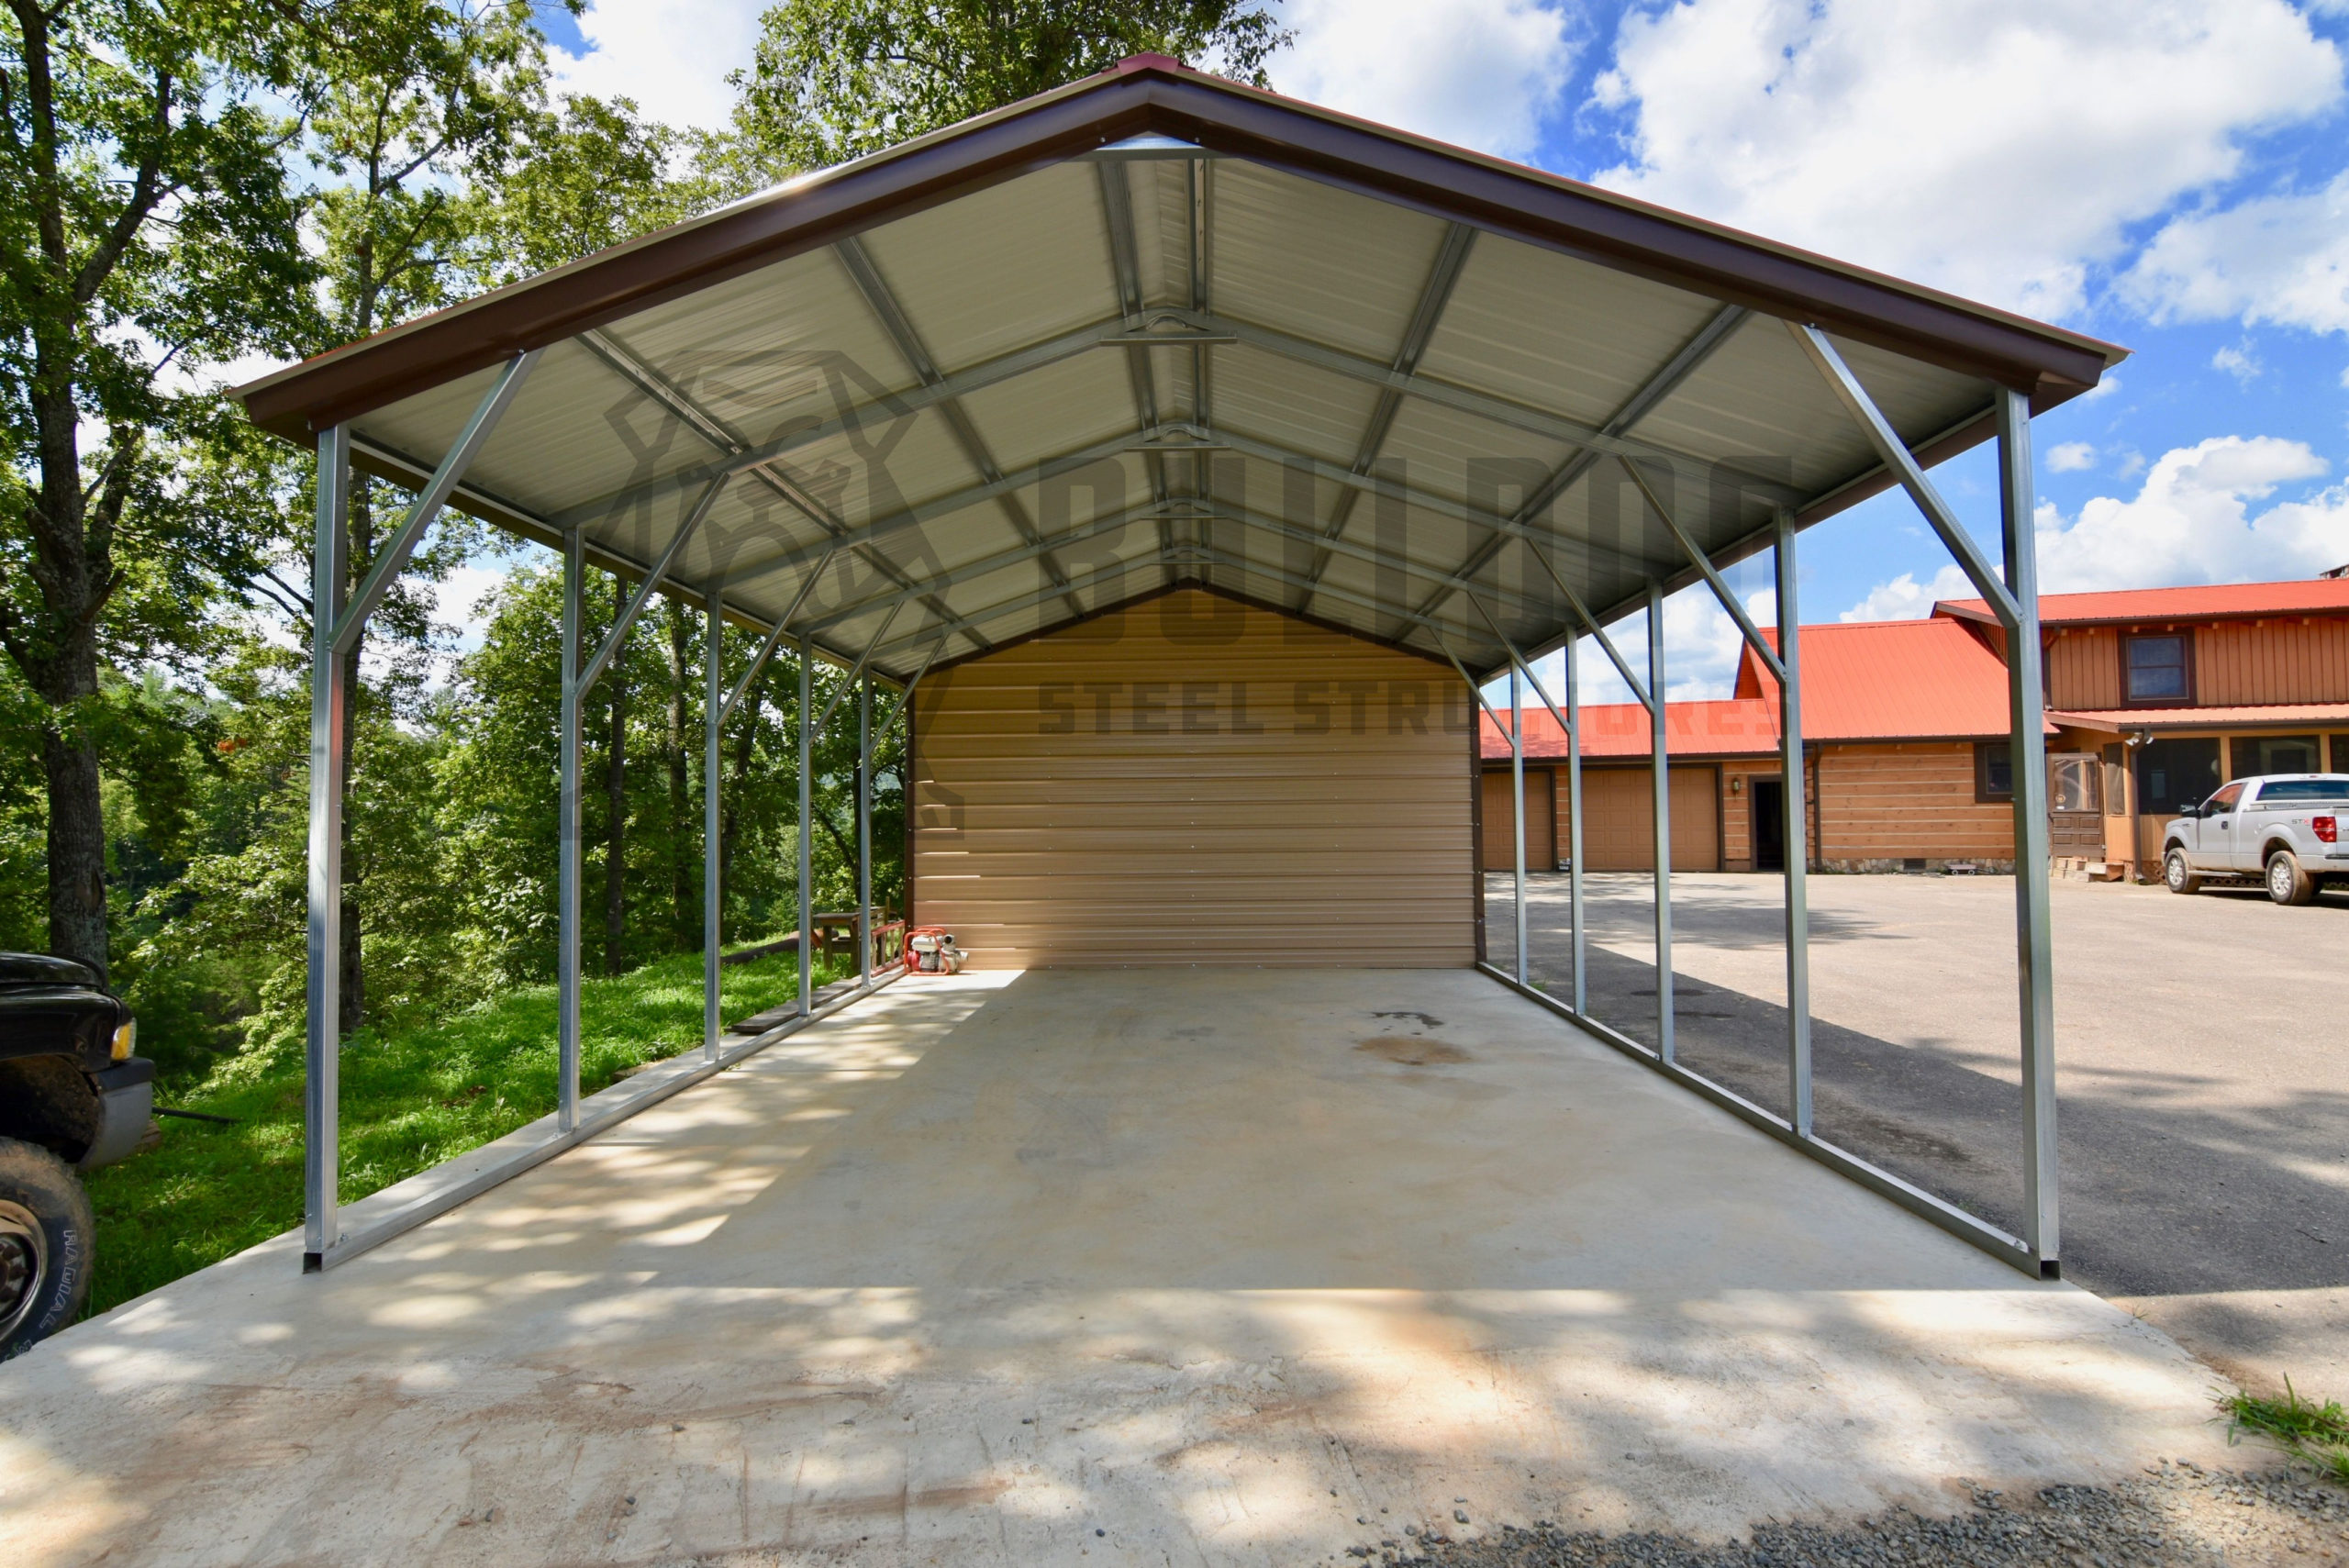 Car port with small storage shed attached to the end